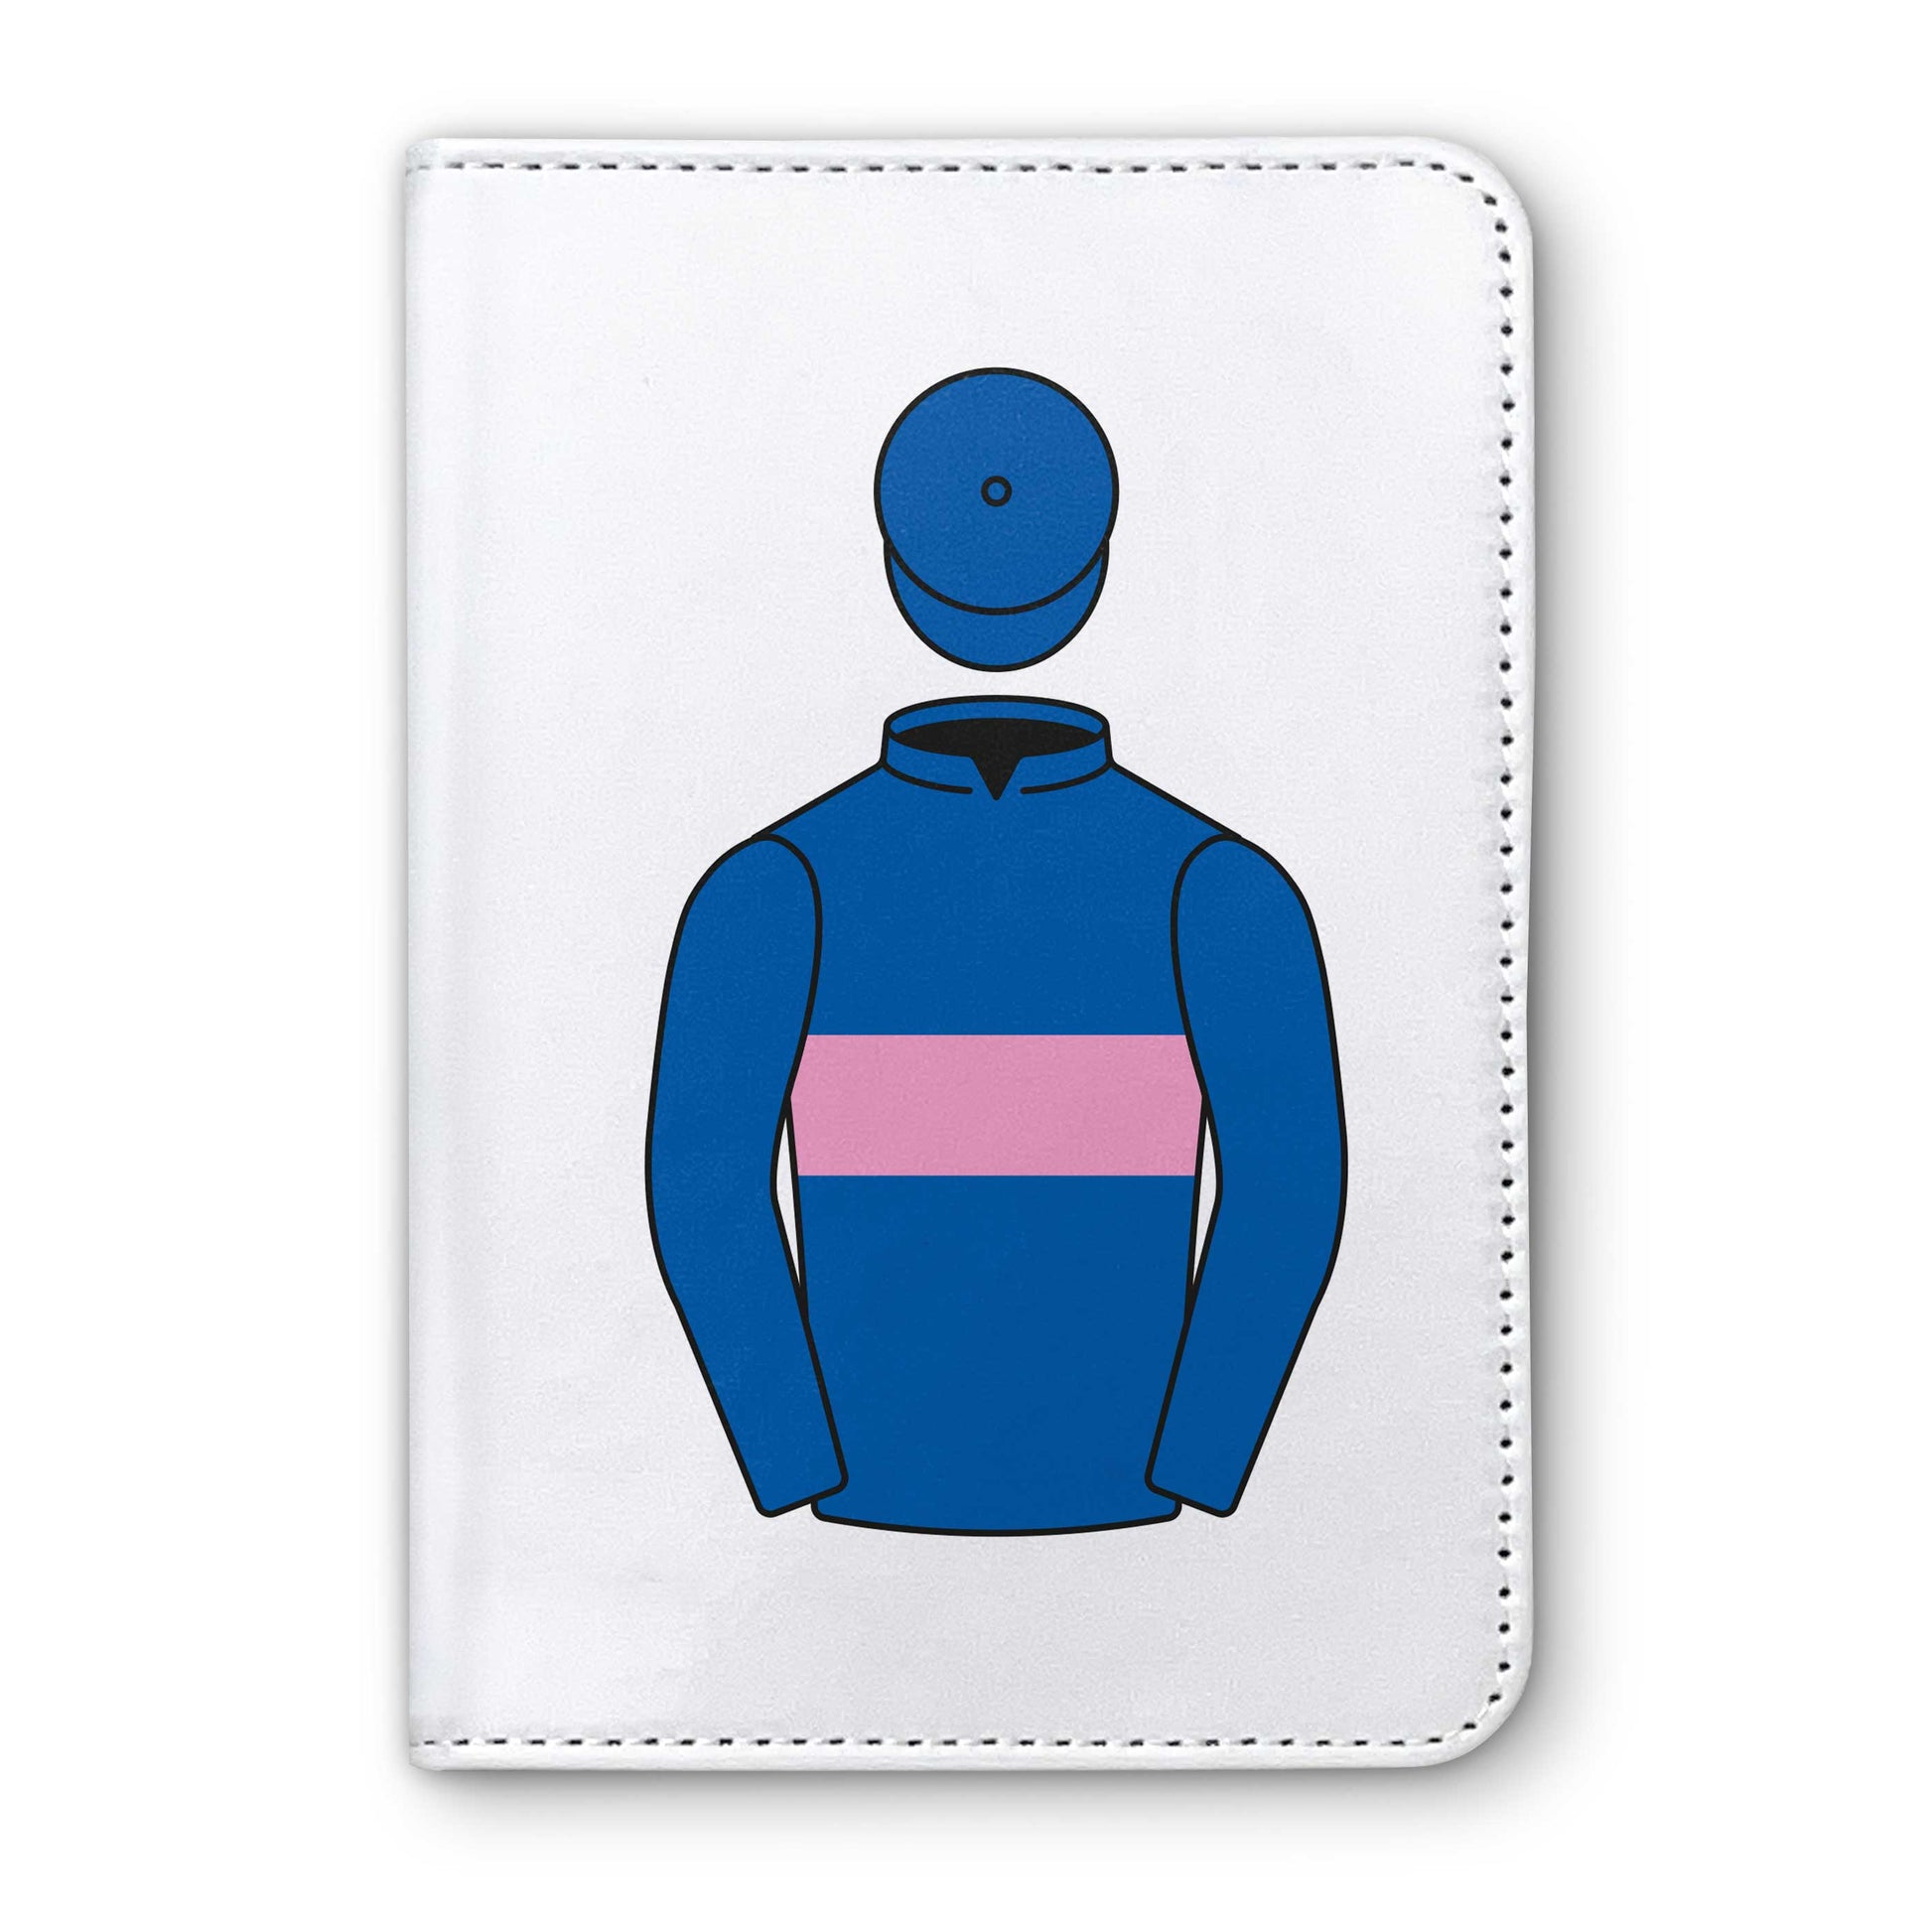 Mr And Mrs William Rucker Horse Racing Passport Holder - Hacked Up Horse Racing Gifts